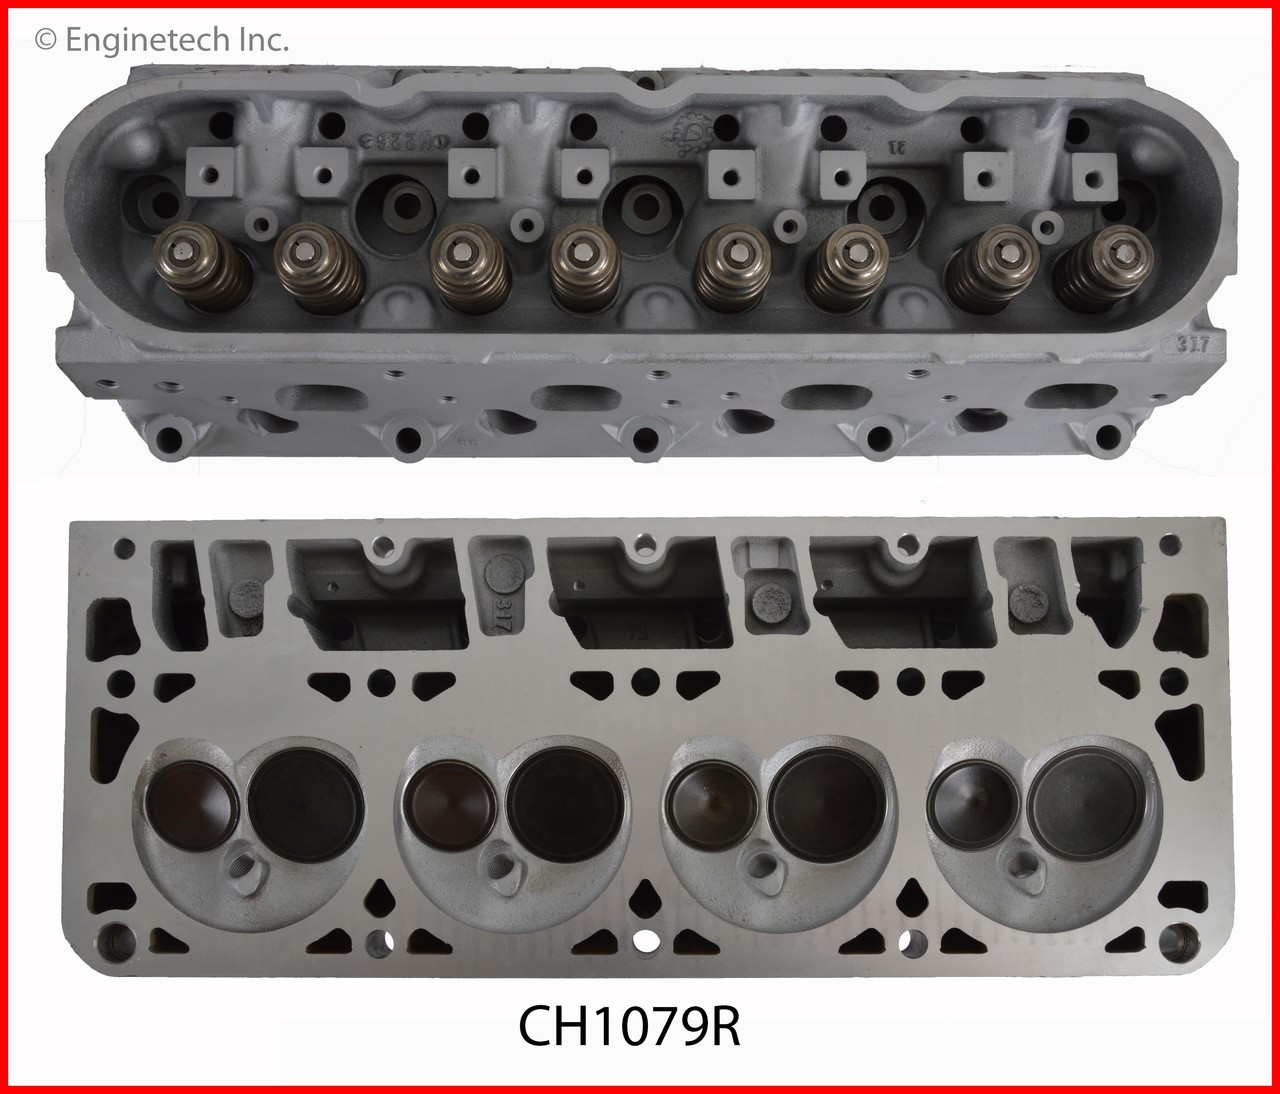 Cylinder Head Assembly - 2006 Chevrolet Express 3500 6.0L (CH1079R.K137)